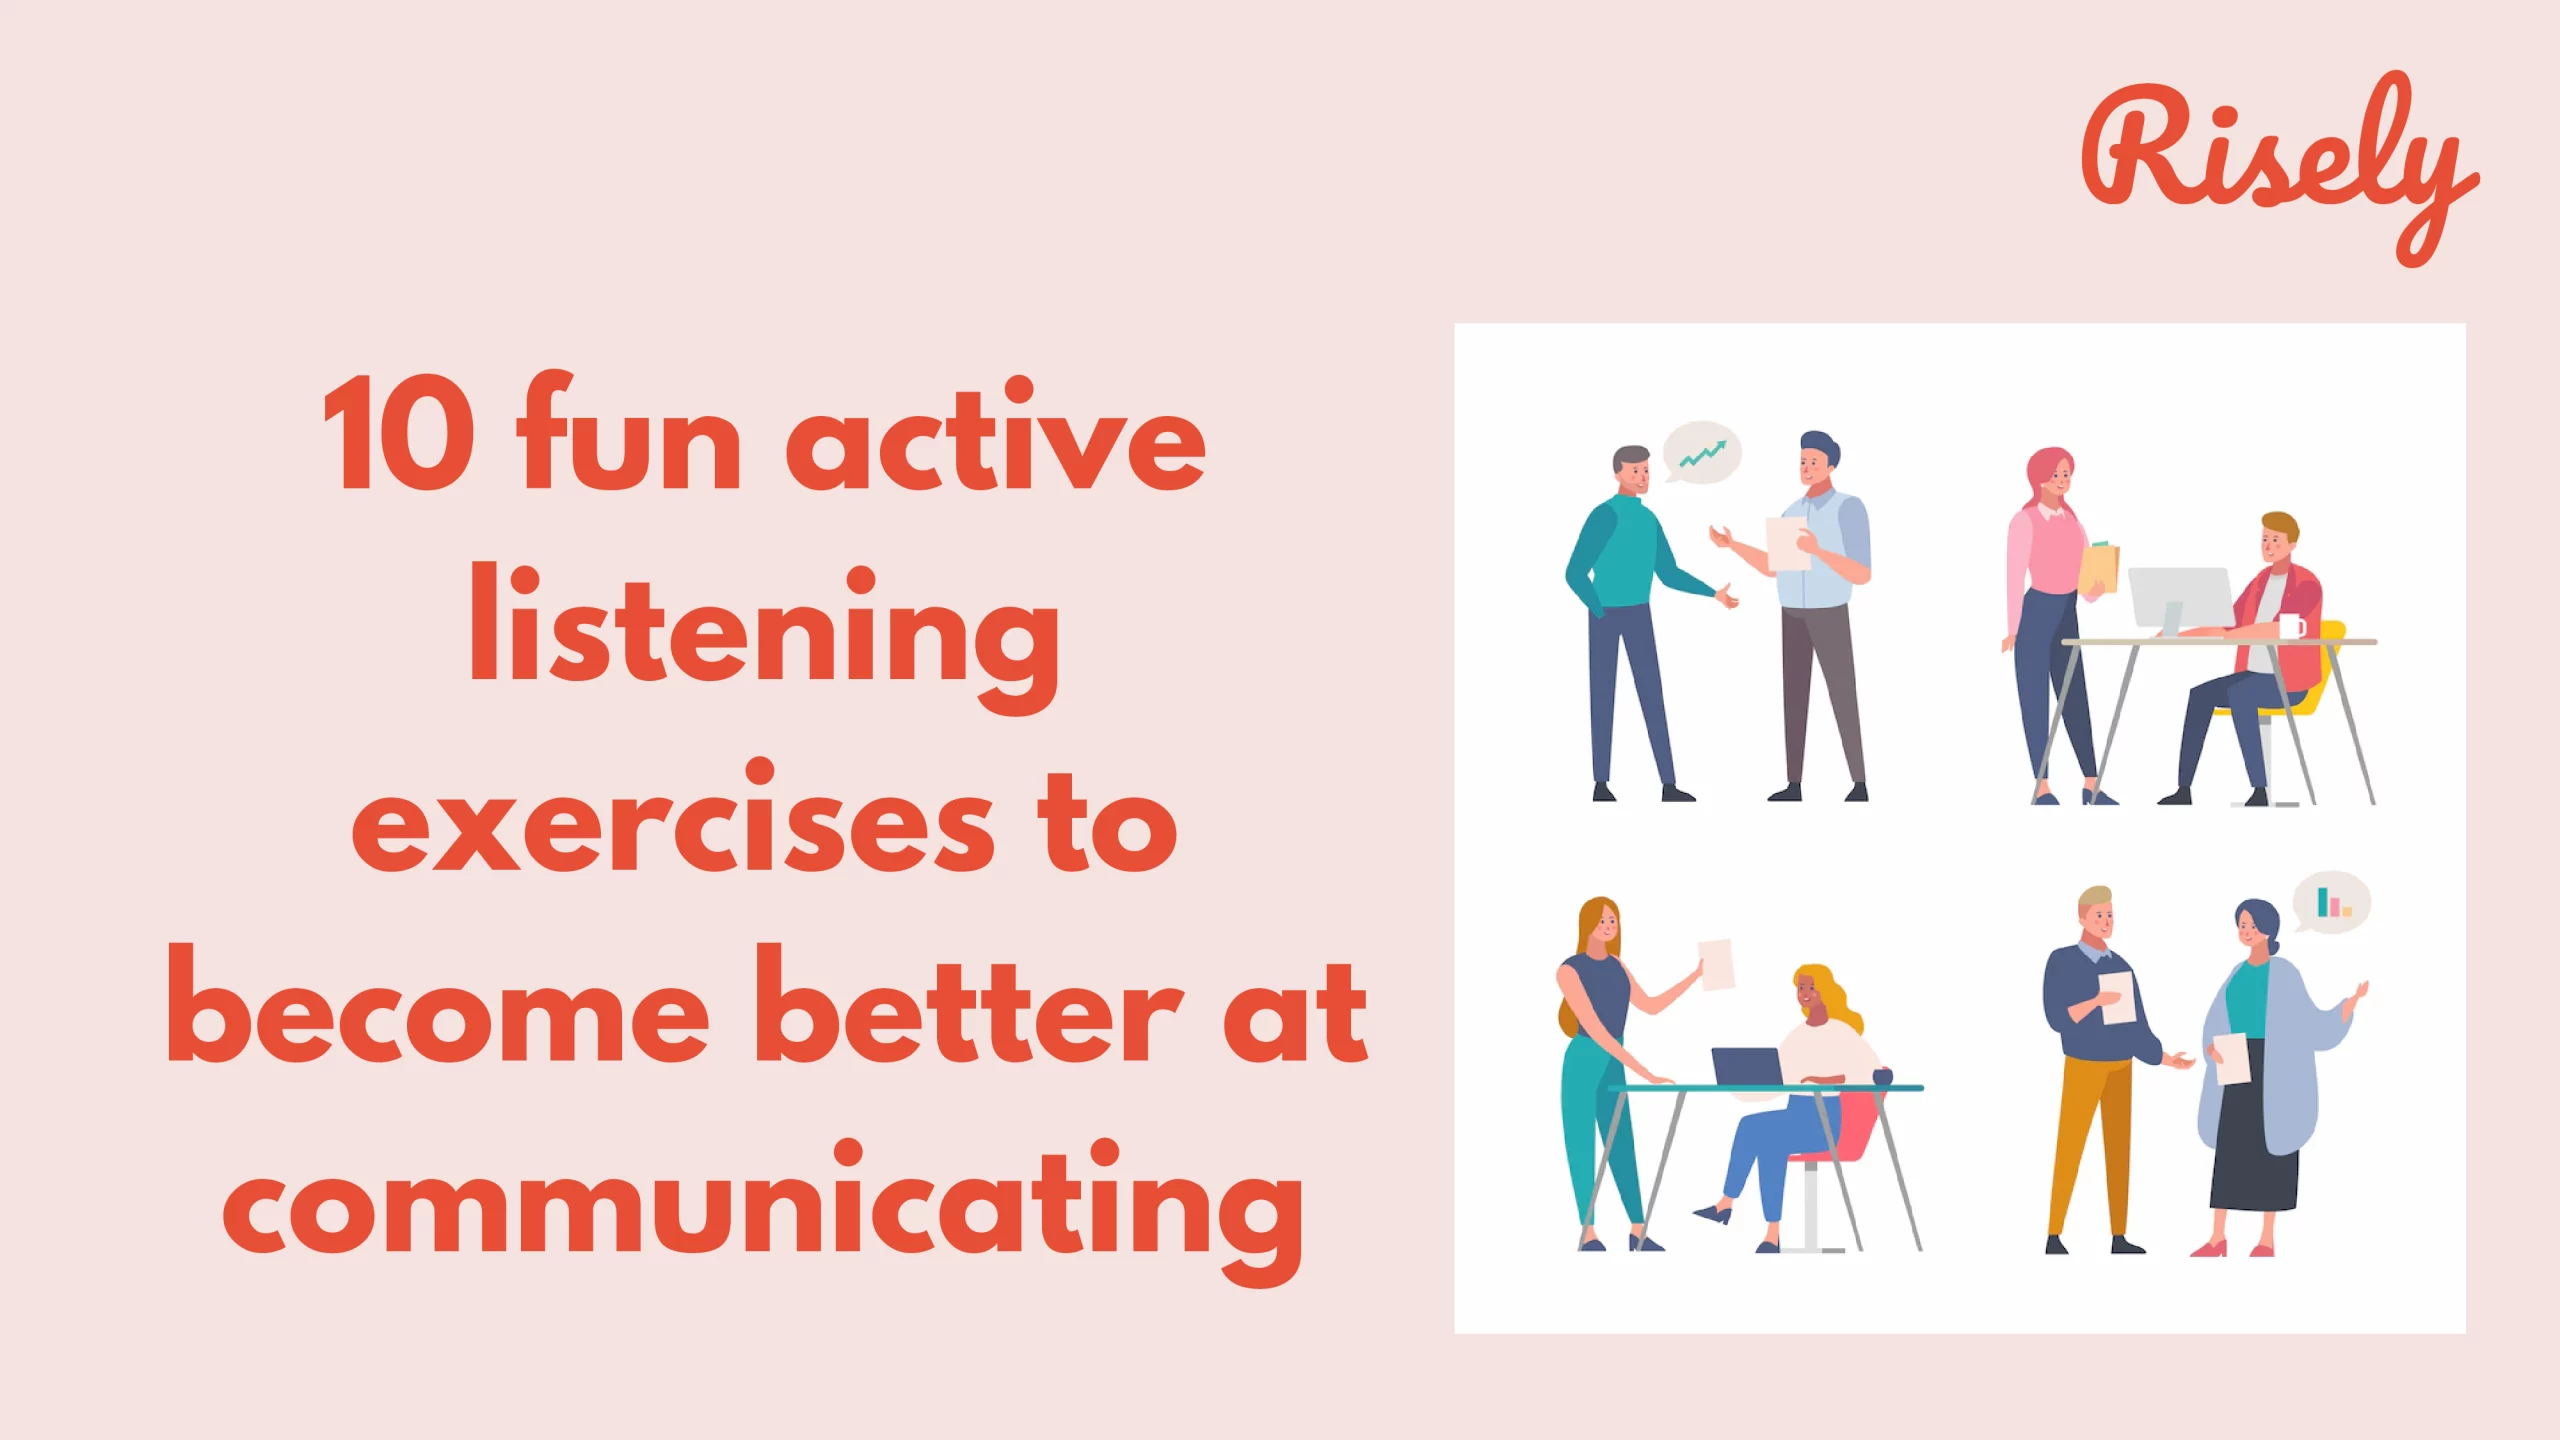 Here are 10 fun active listening exercises to become better at communicating